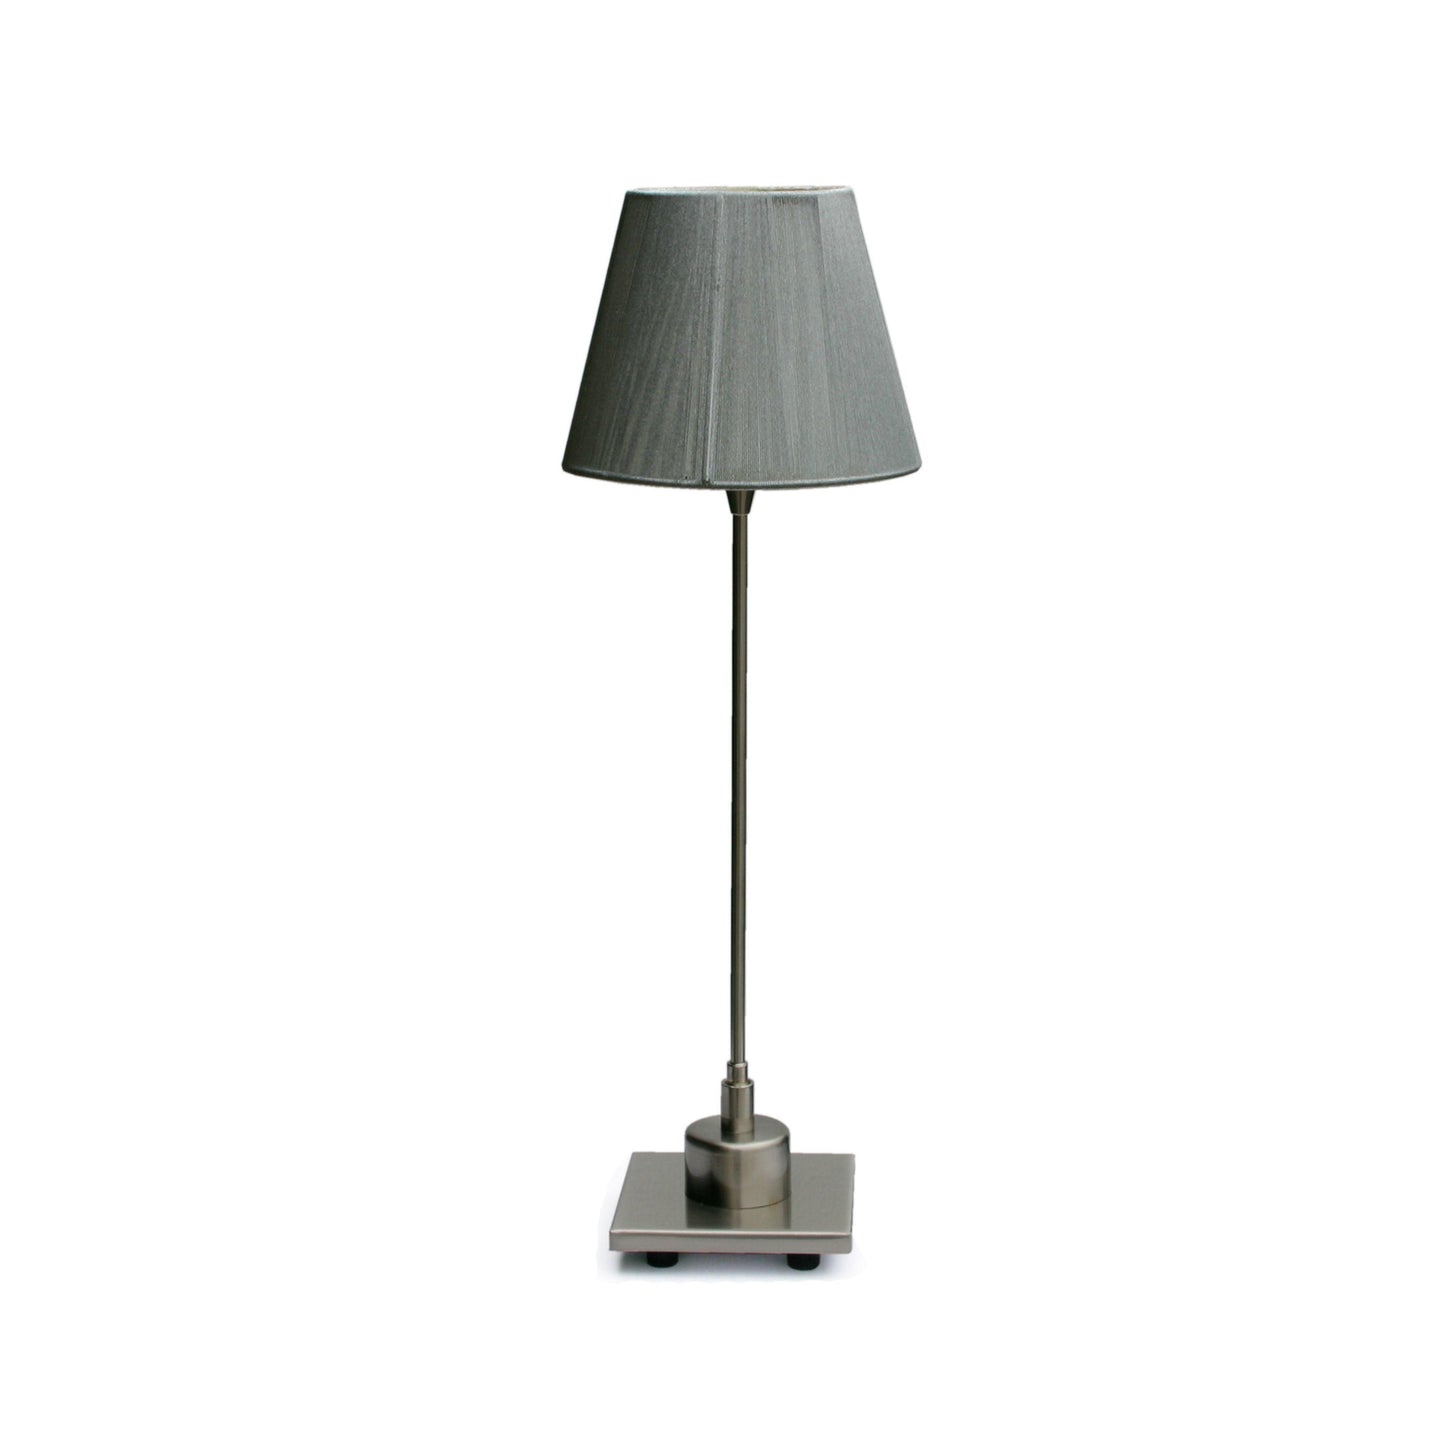 Gemini Low Voltage Table Lamp With Silver Shade - V&M IMPORTS Australia